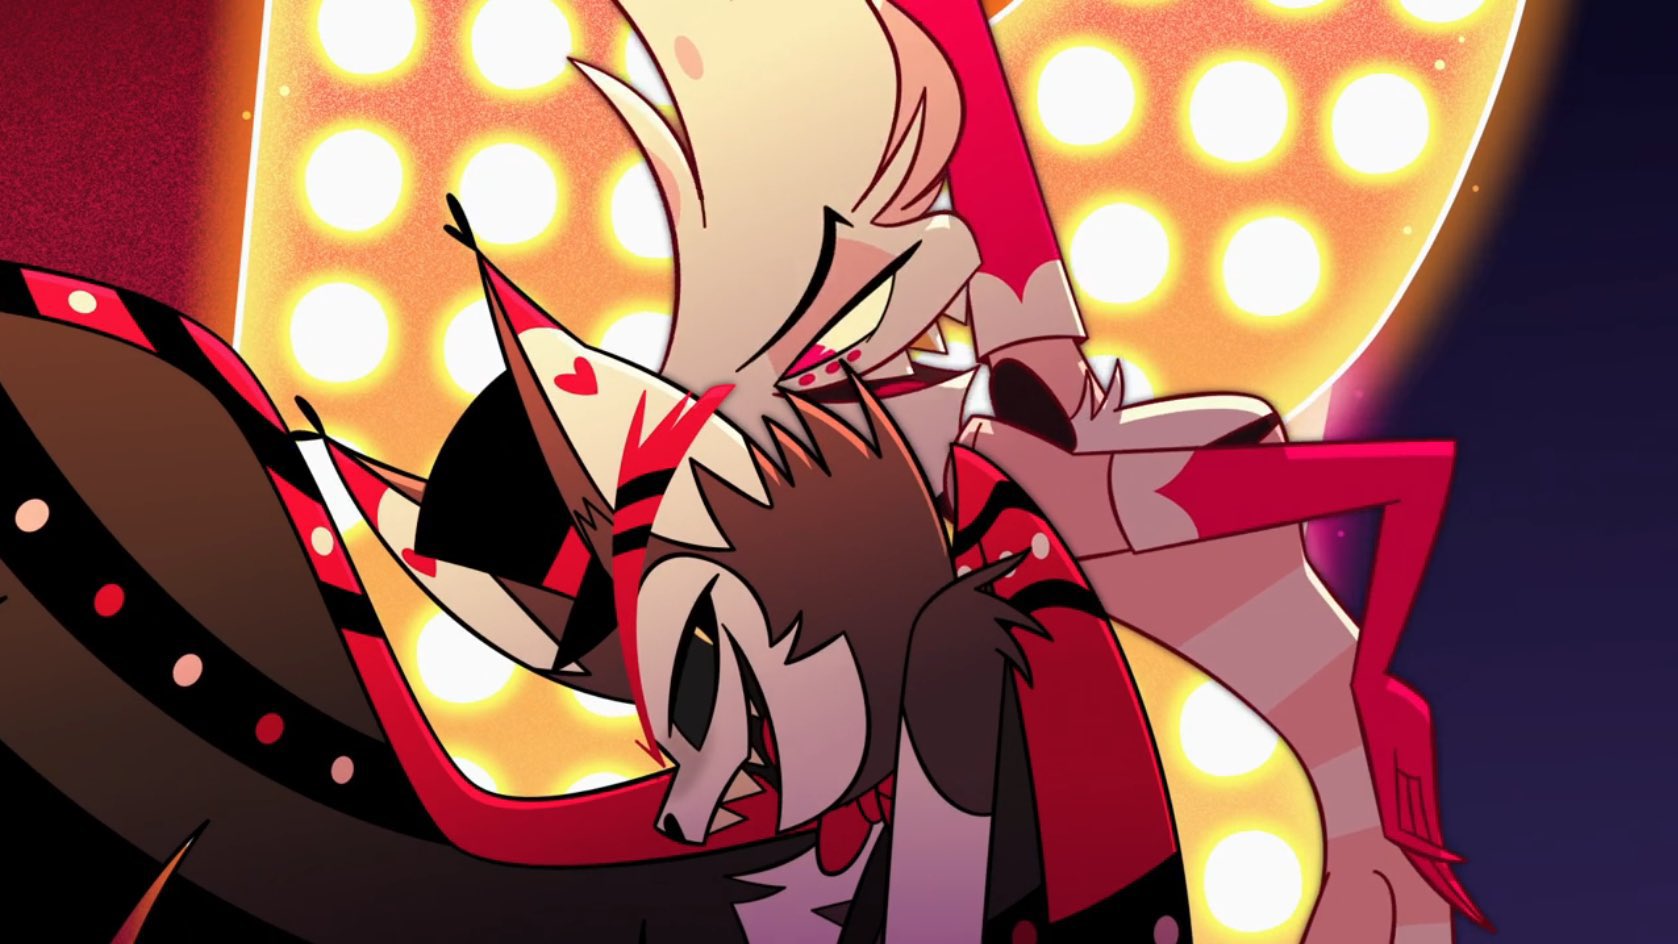 Cherries And Merry on X: "Now Episode 4…. If I was to describe Masquerade I would say 100 out of fucking 100. This episode is one of the best episodes in Hazbin